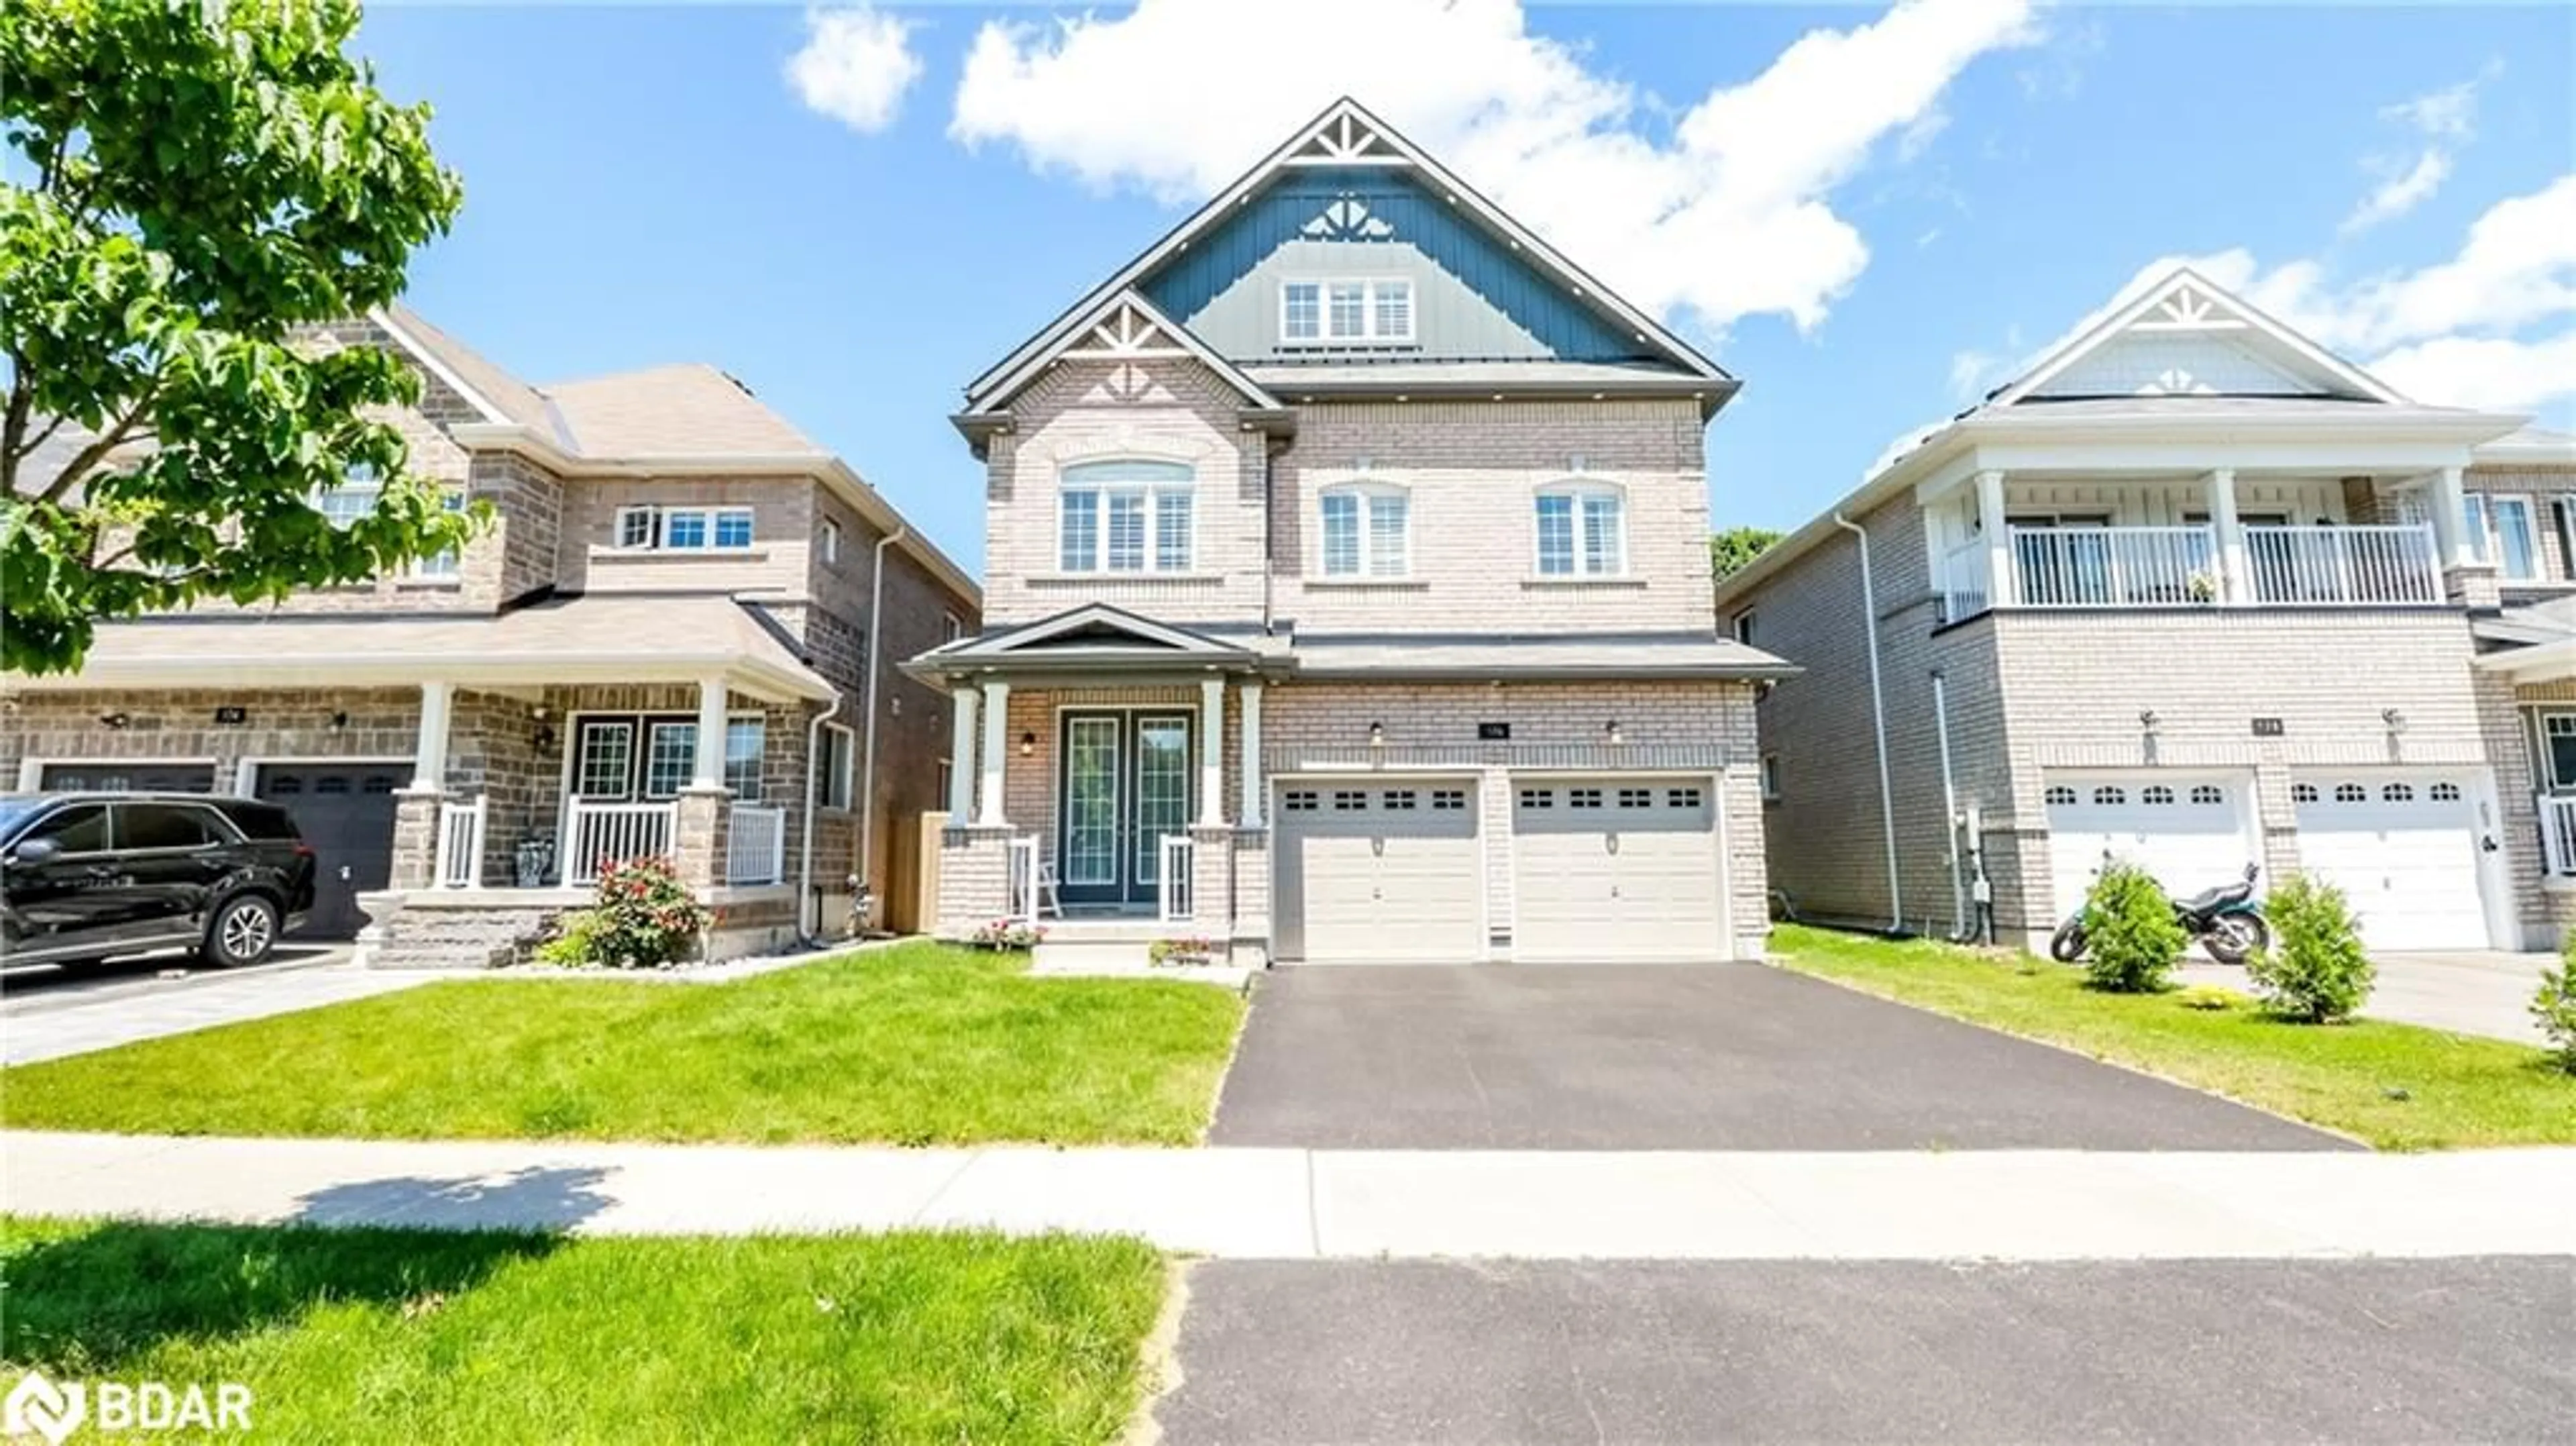 Frontside or backside of a home for 176 Birkhall Place, Barrie Ontario L4N 0K9